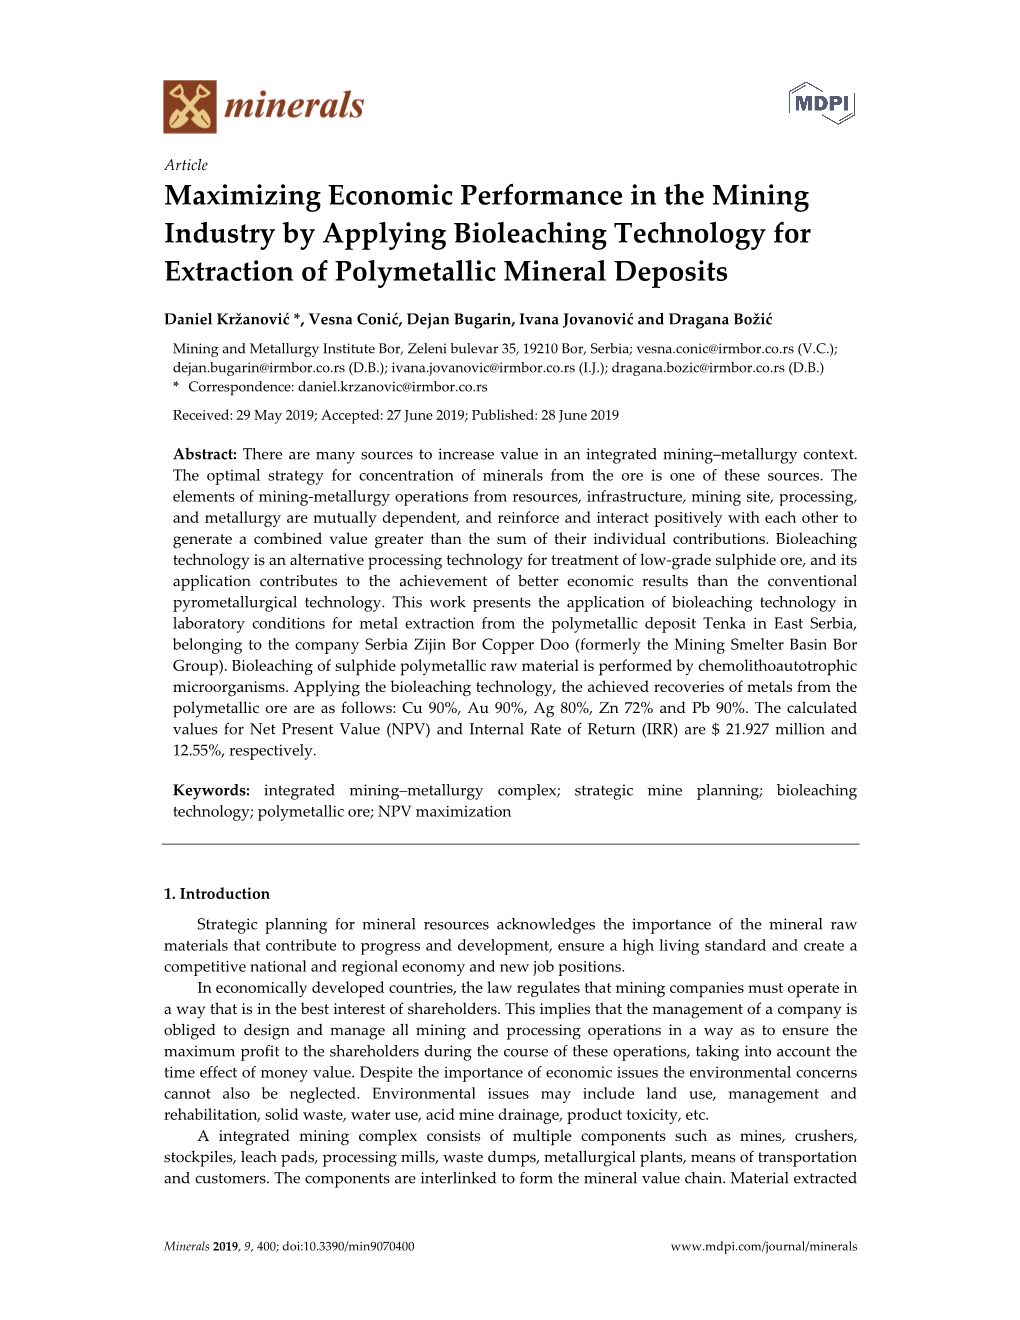 Maximizing Economic Performance in the Mining Industry by Applying Bioleaching Technology for Extraction of Polymetallic Mineral Deposits